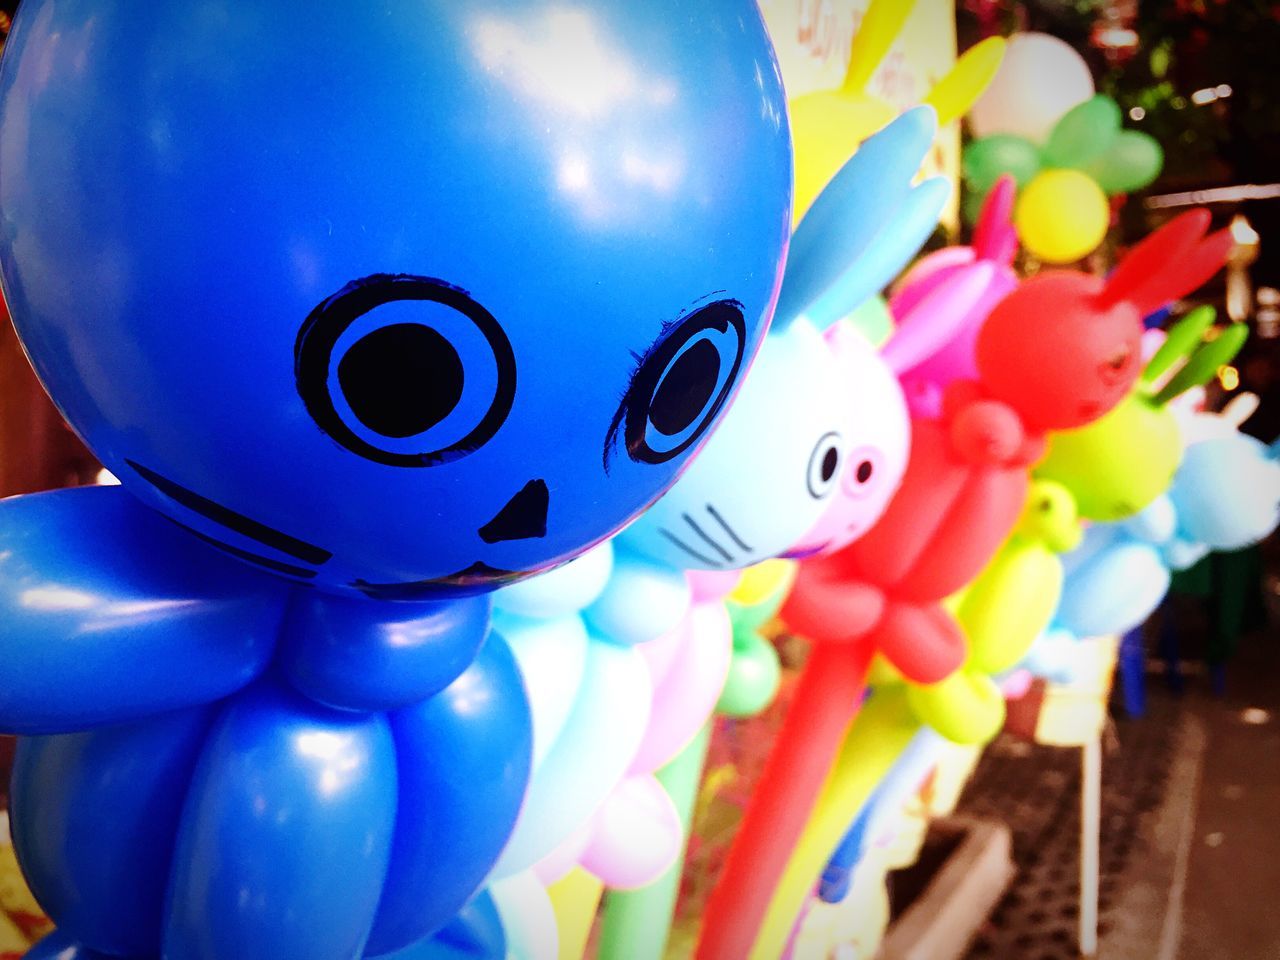 CLOSE-UP OF COLORFUL BALLOONS